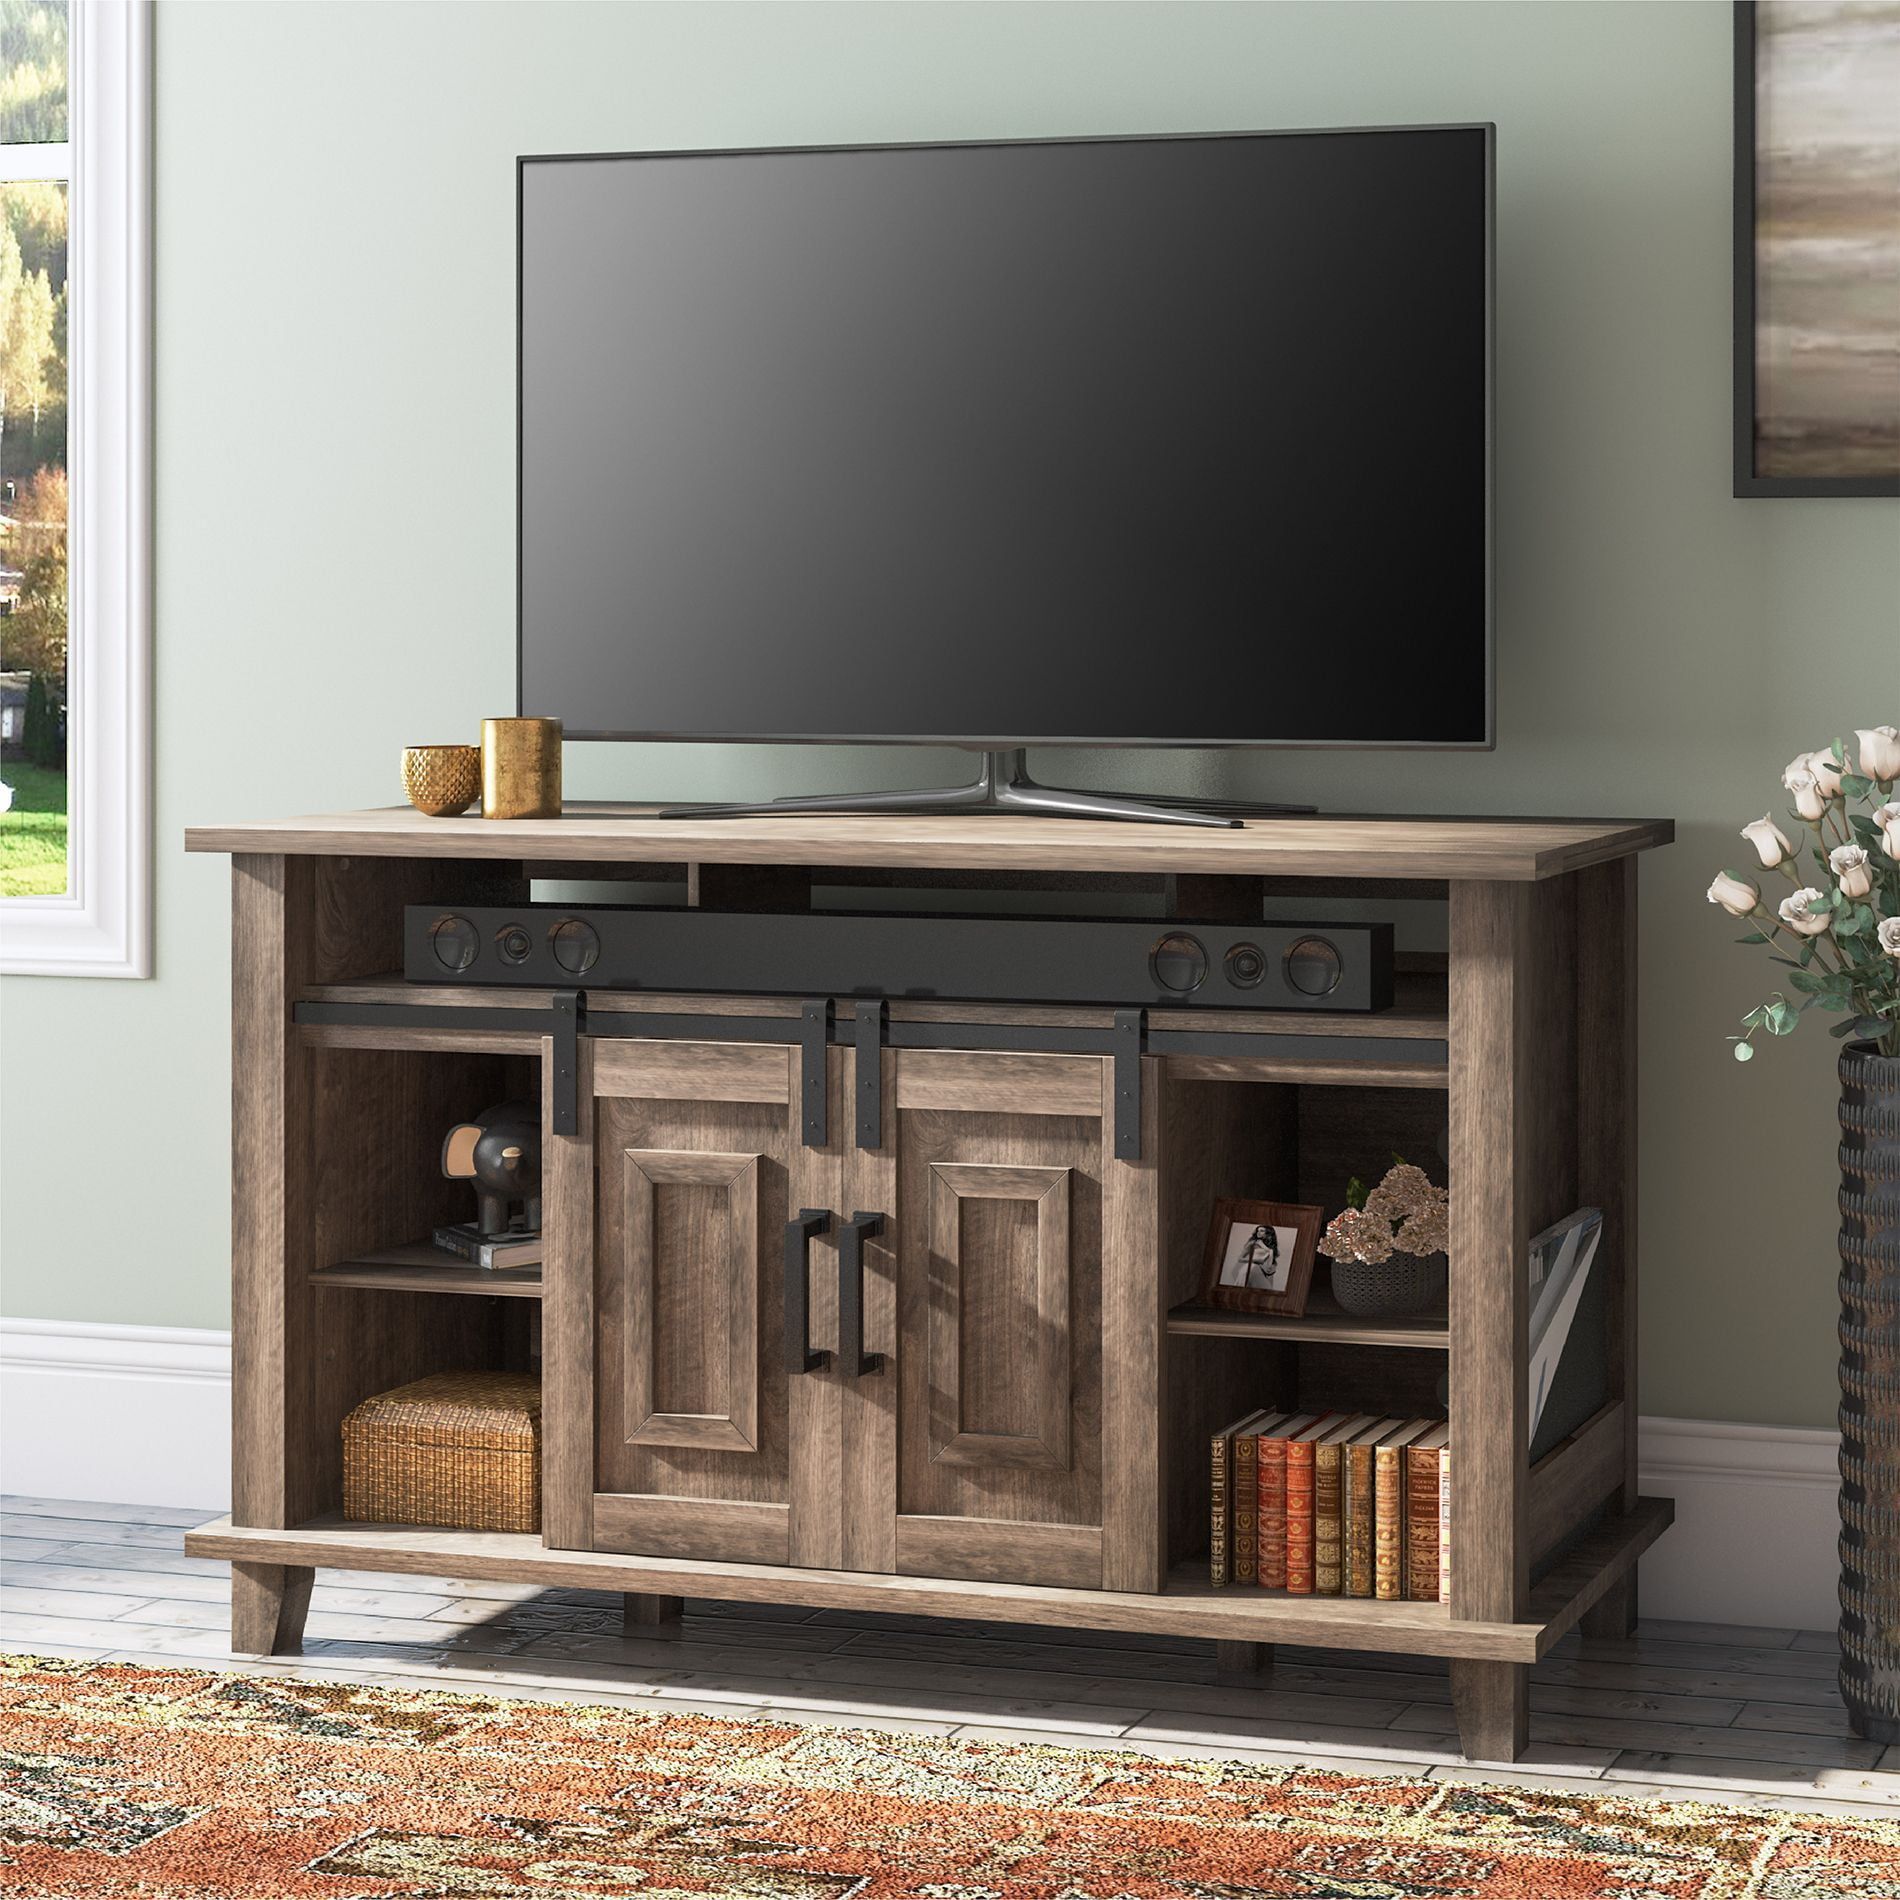 Wampat Farmhouse Sliding Barn Door Tv Stand, Gray Wood Tv Stands For 60 Throughout Farmhouse Stands For Tvs (View 20 of 20)